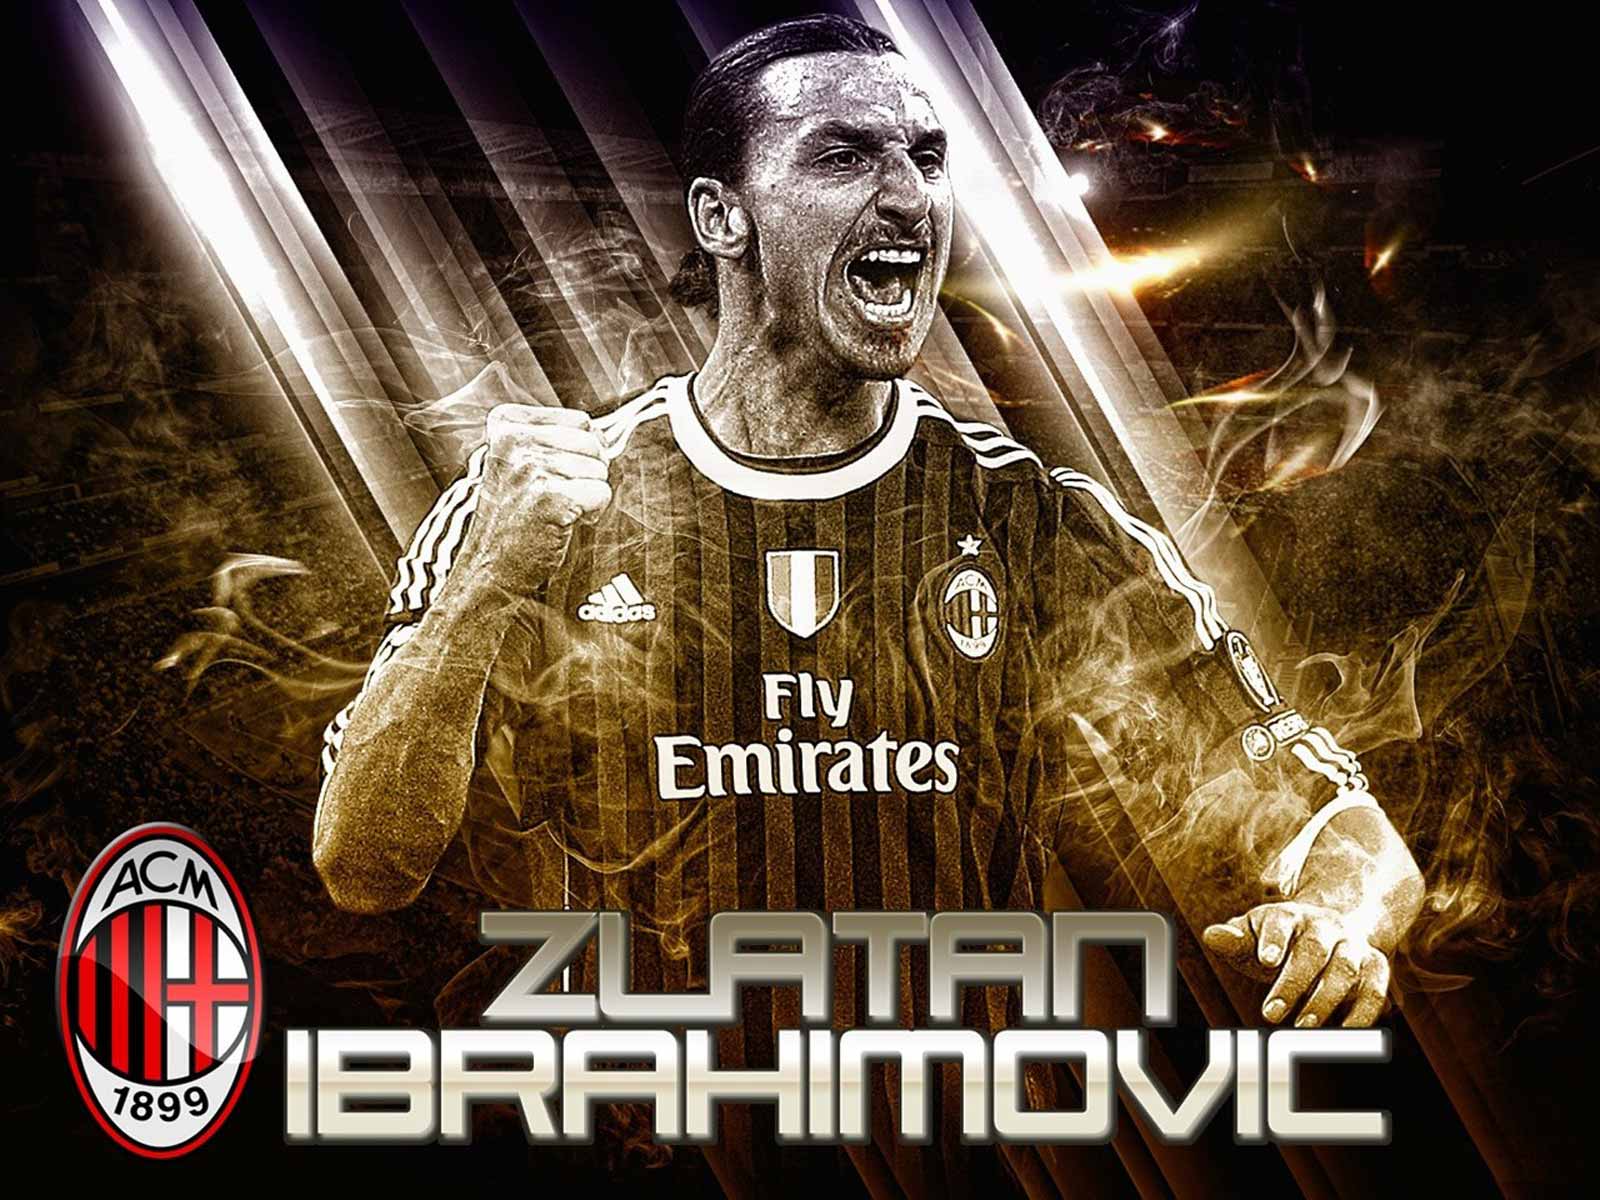 All About 2013: Zlatan Ibrahimovic New HD Wallpapers 2013-2014